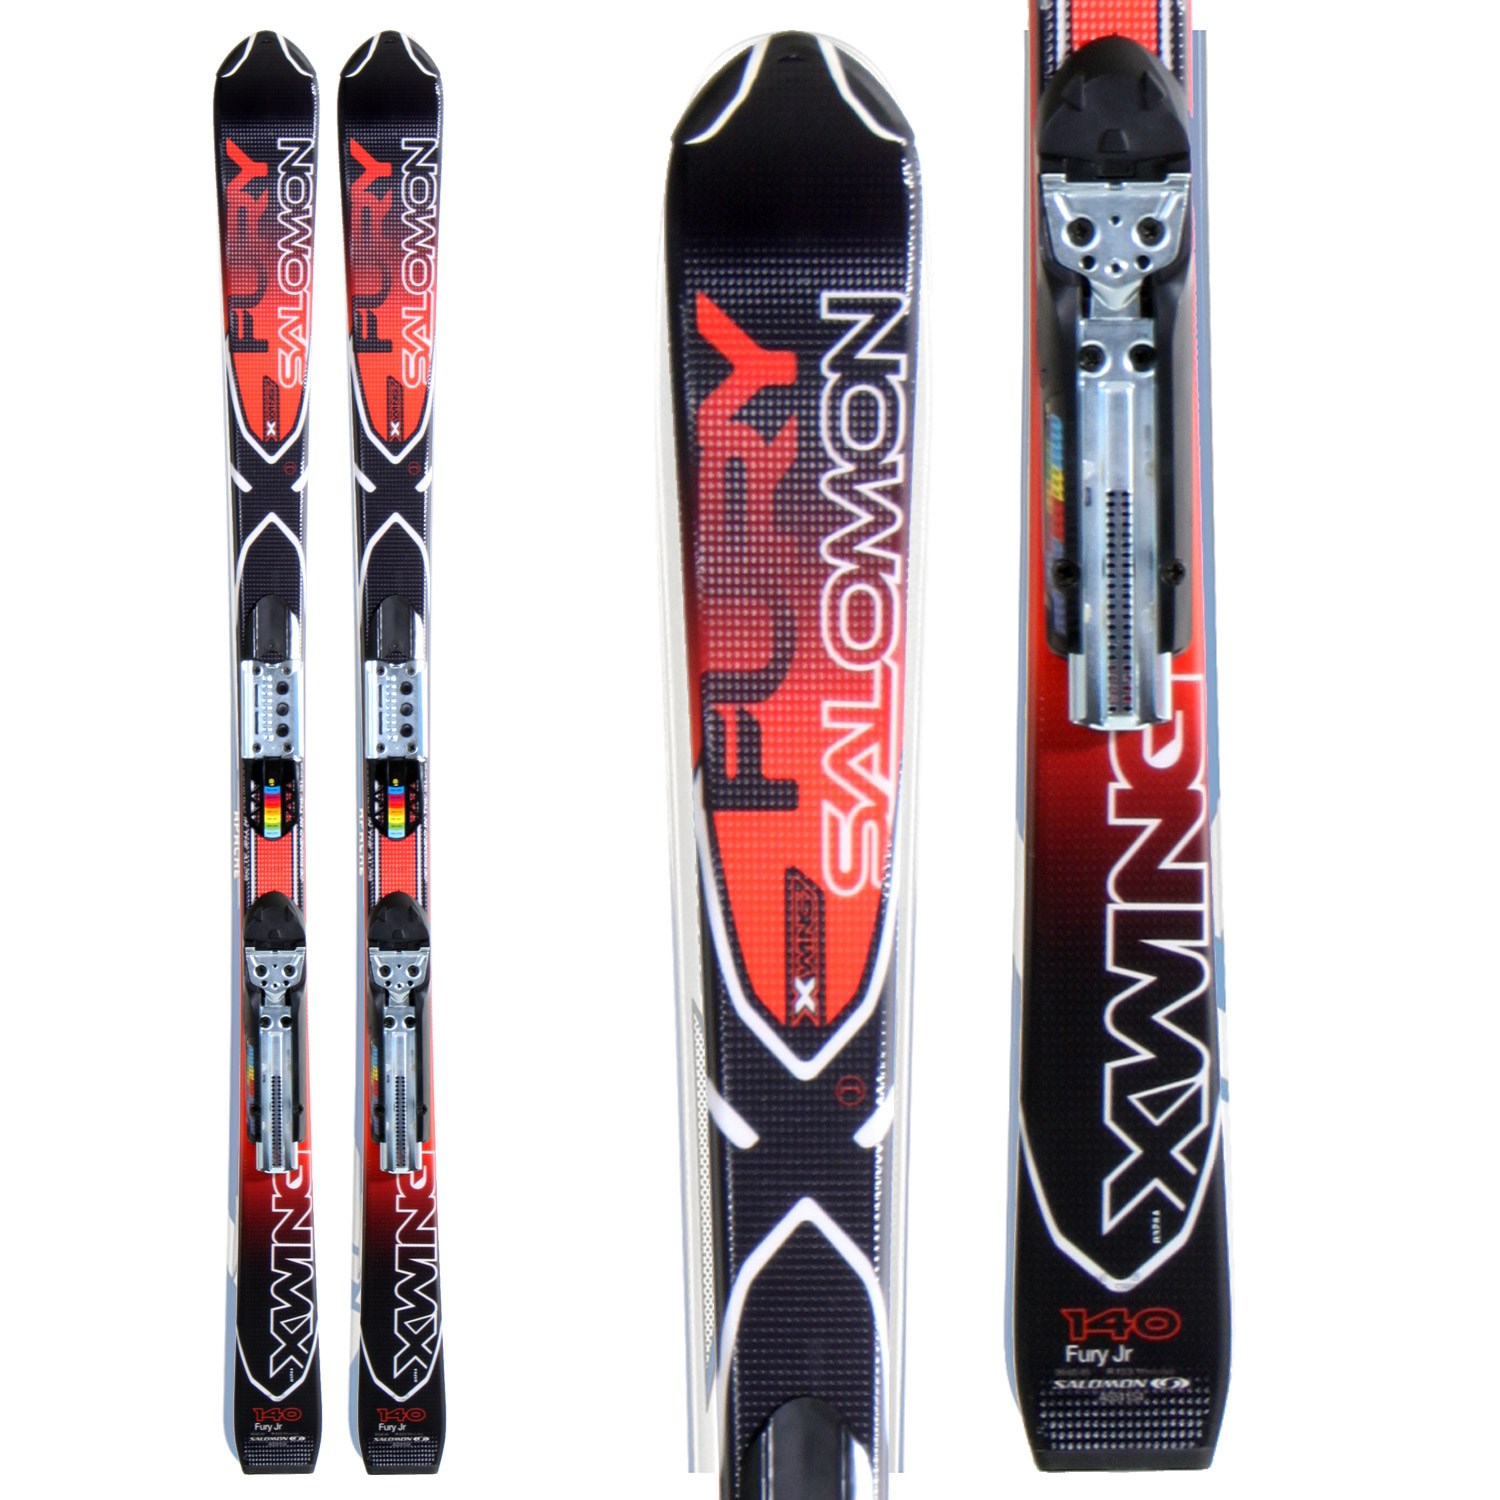 gøre ondt Vaccinere Rund ned Salomon X-Wing Fury Junior Skis + L7 SC Bindings - Youth 2011 | evo